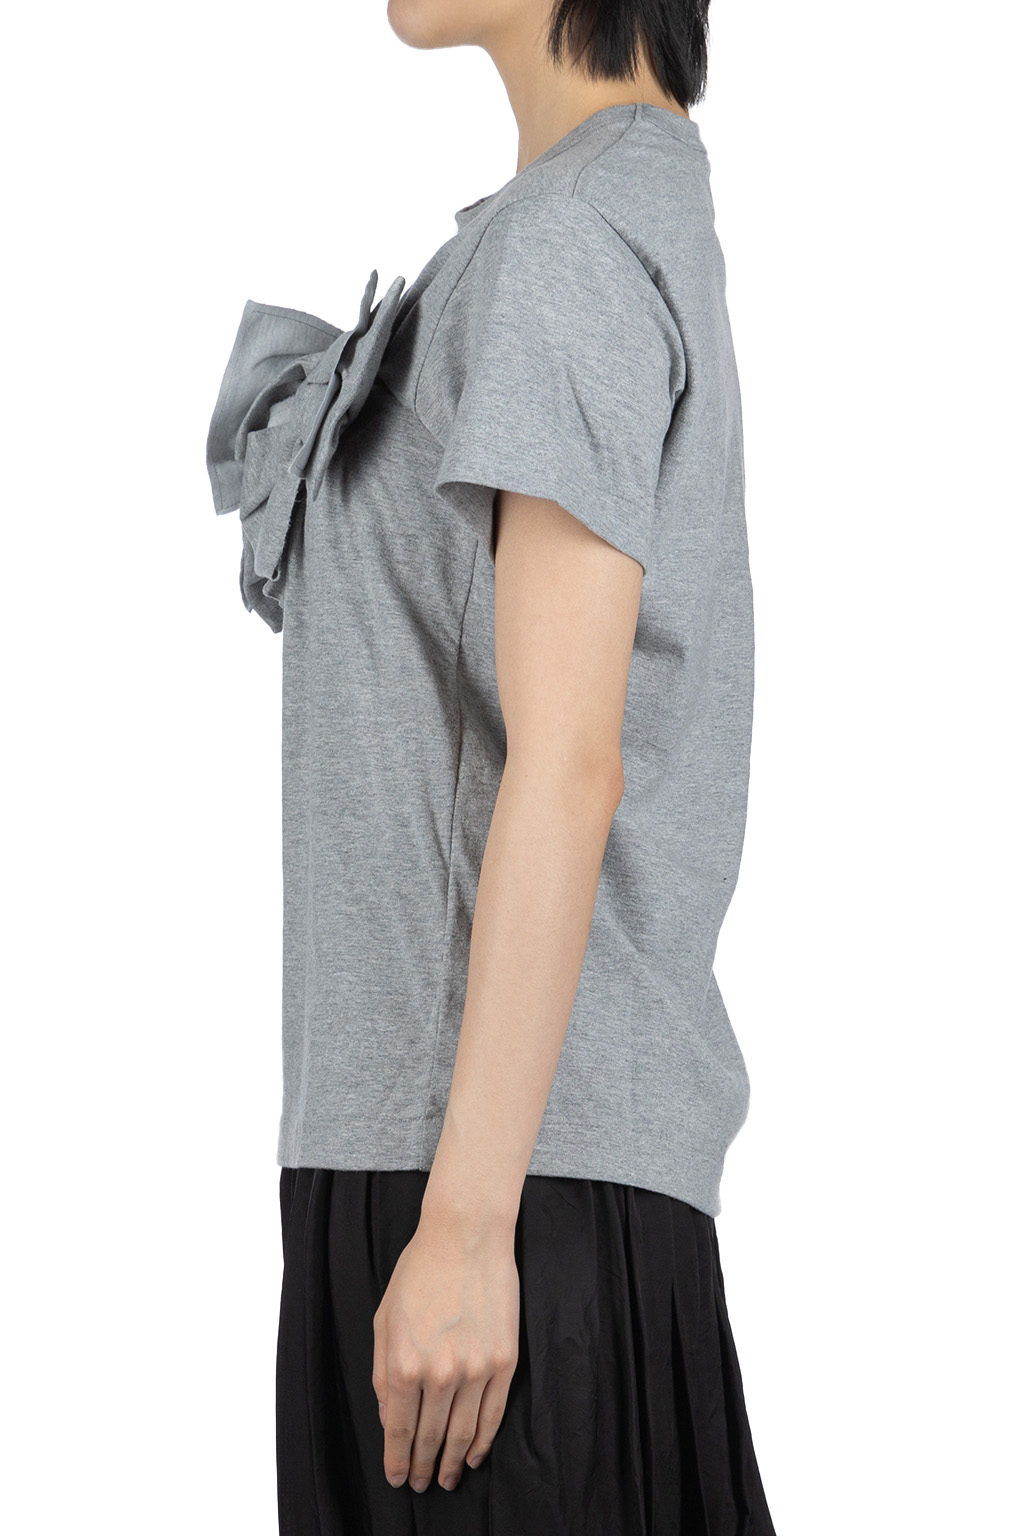 Comme Des Garcons TAO - Cotton Jersey Ribbons Tee - Top Gray